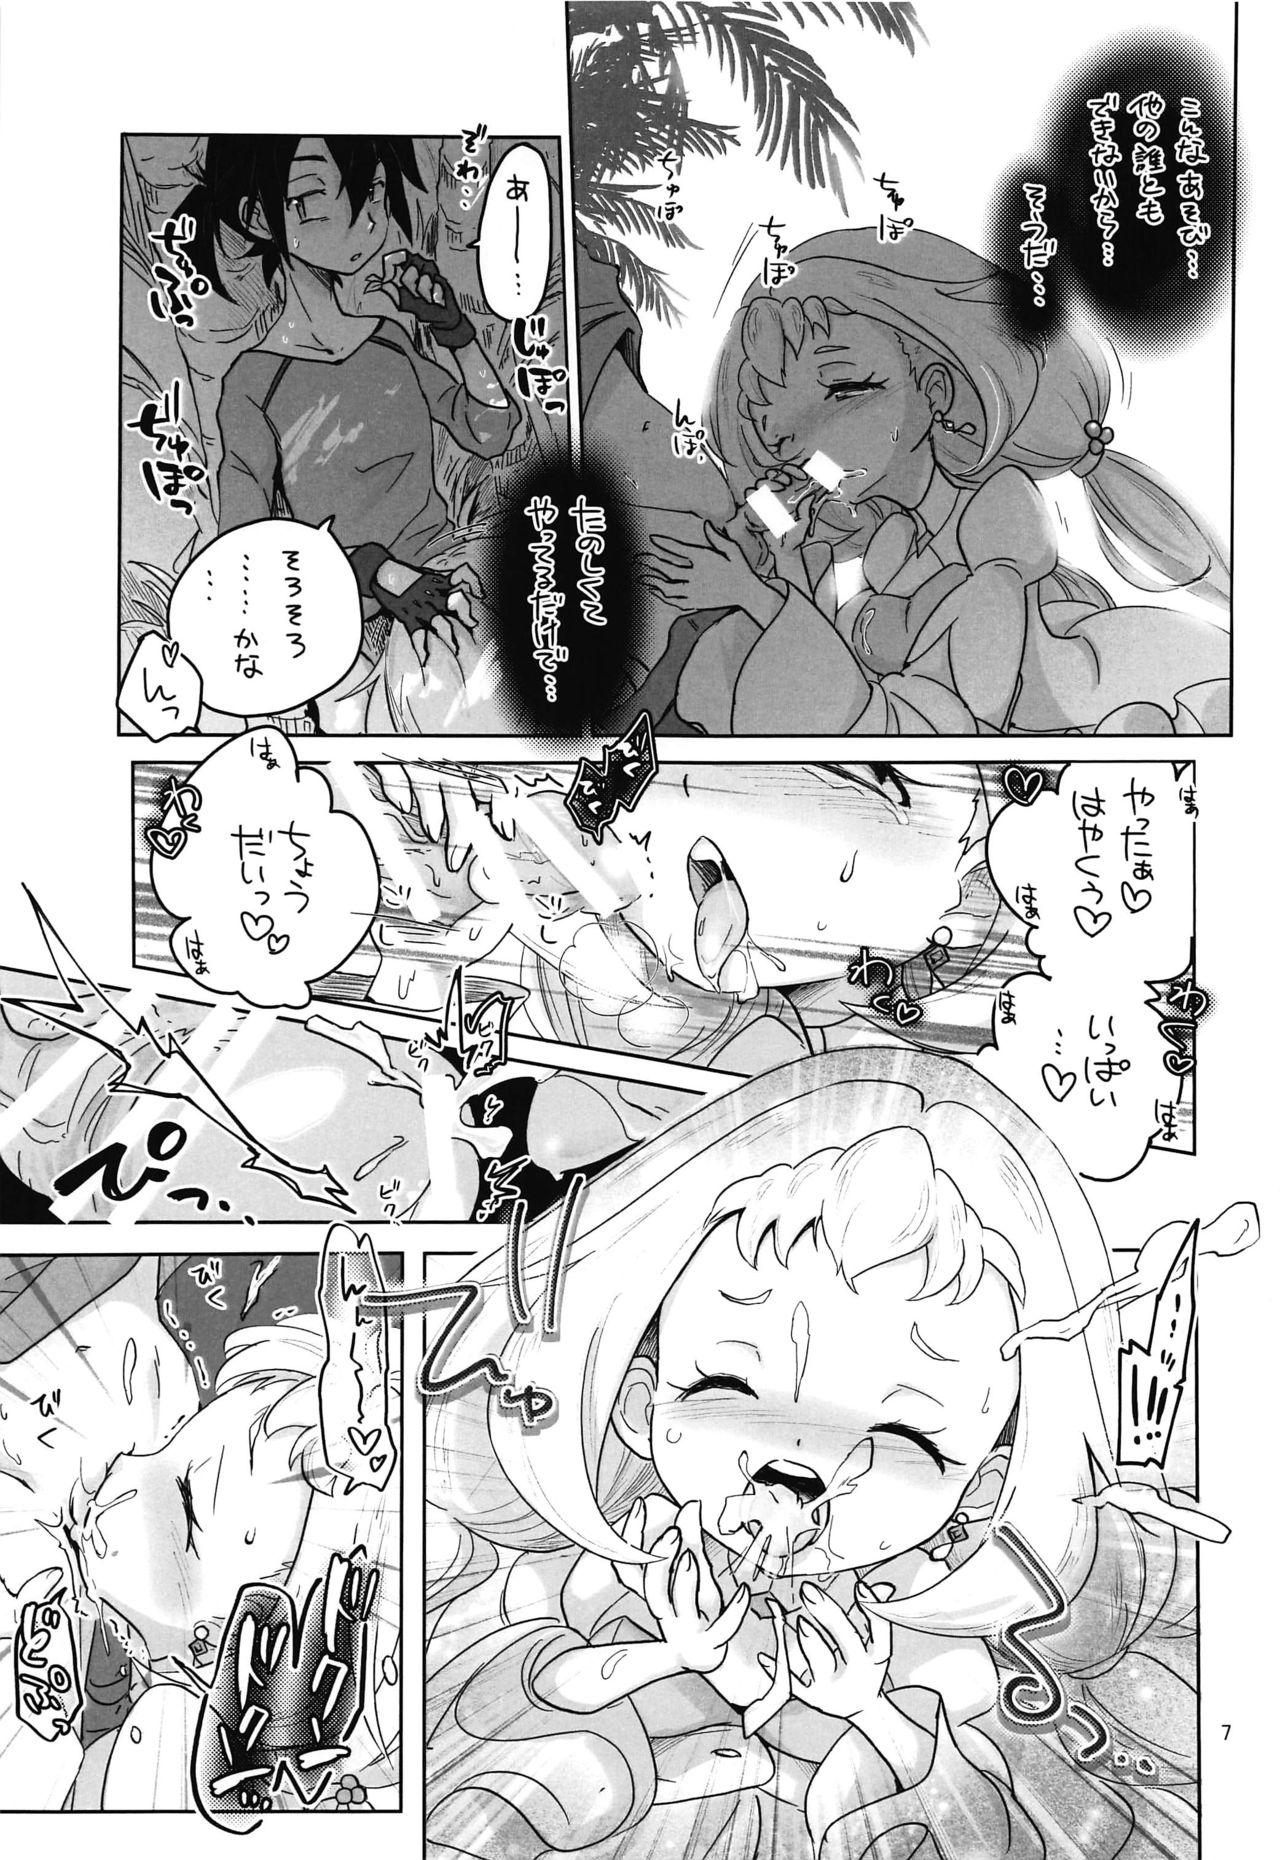 Milfsex Comin' Thro' the DAYDREAM - Gundam build divers Pussylicking - Page 6